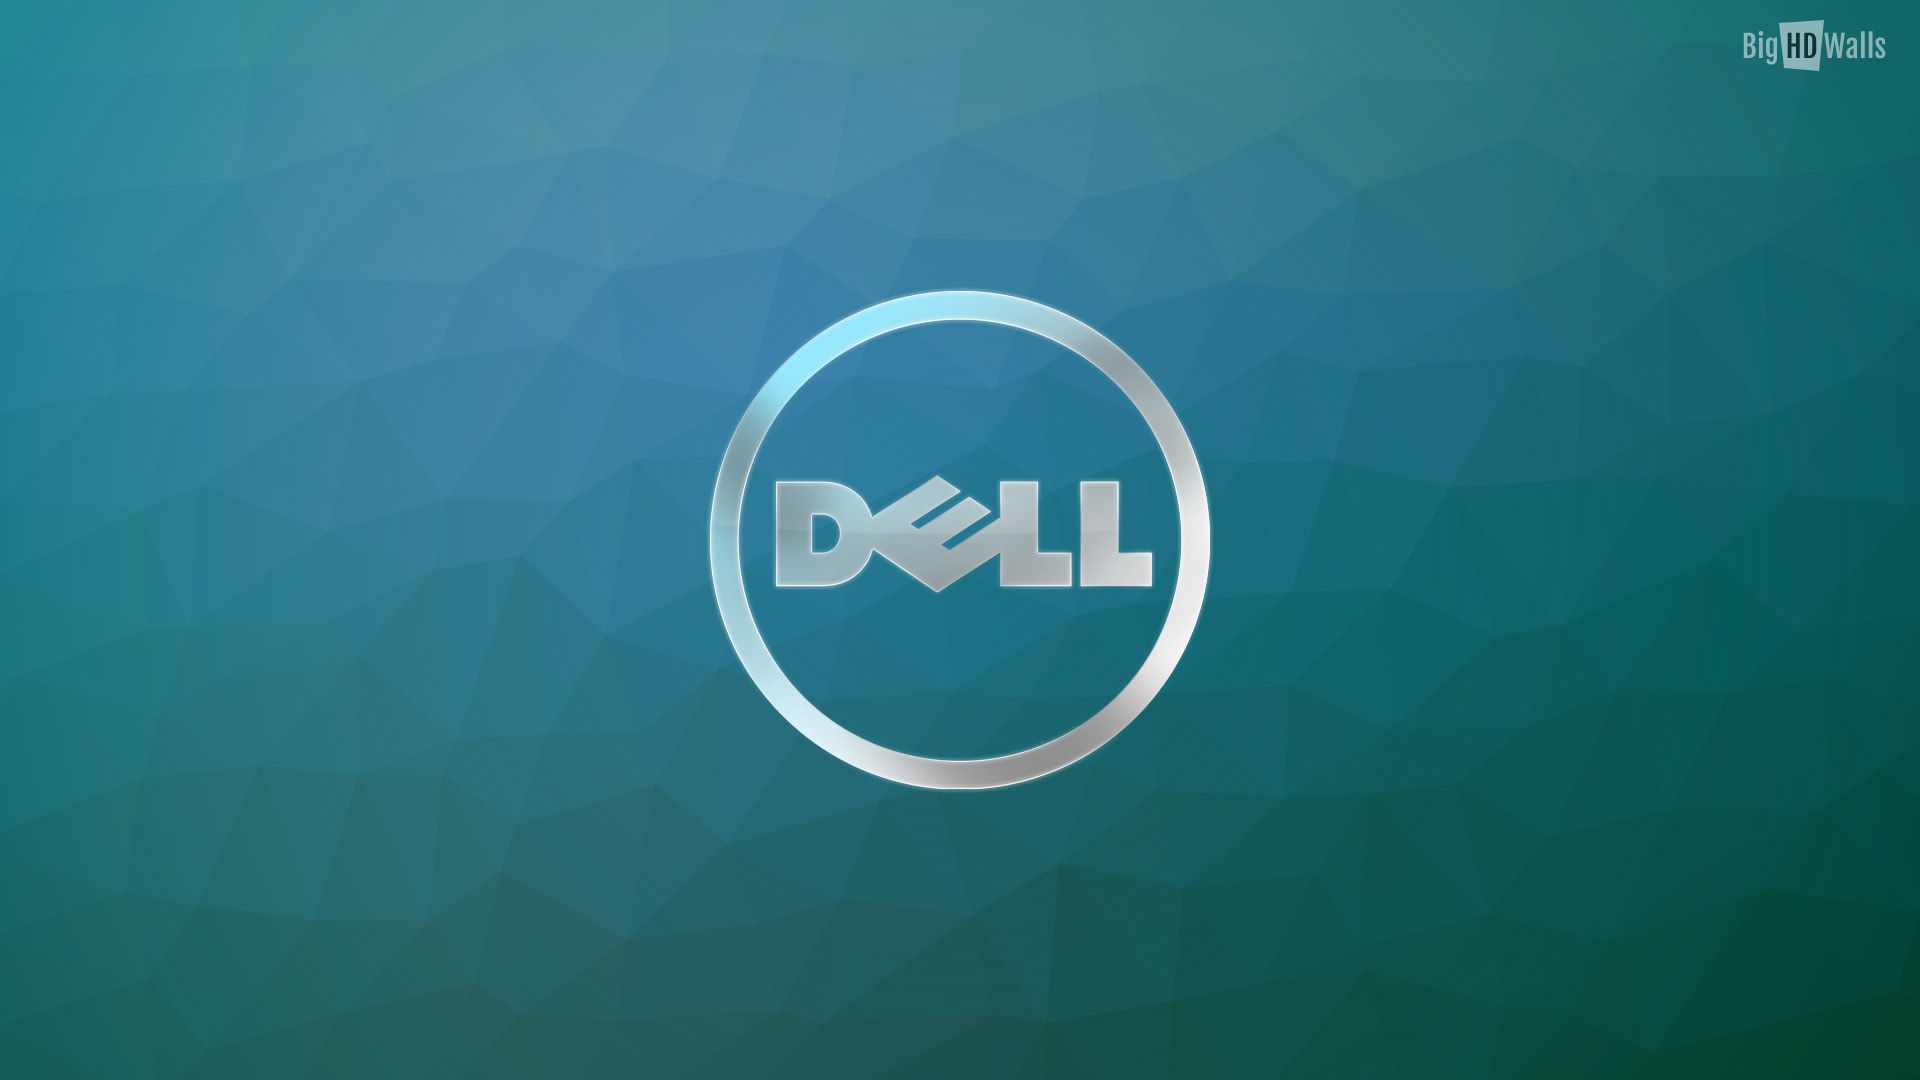 Dell Blue Wallpapers